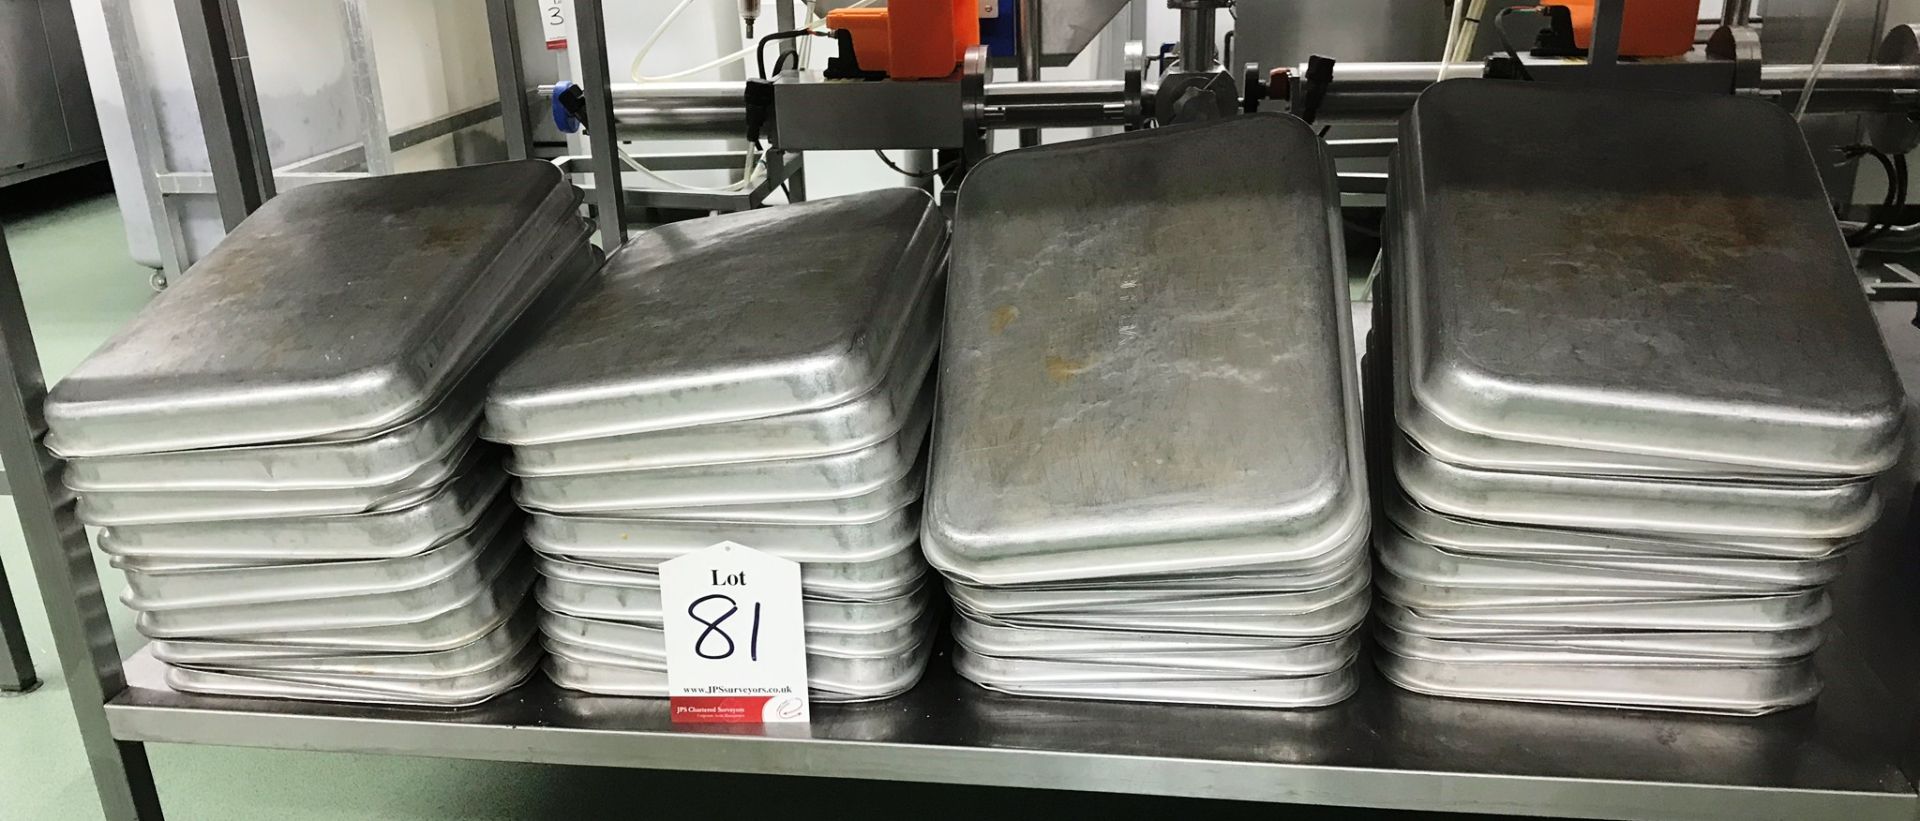 Approximately 40 x Baking Trays | As Pictured